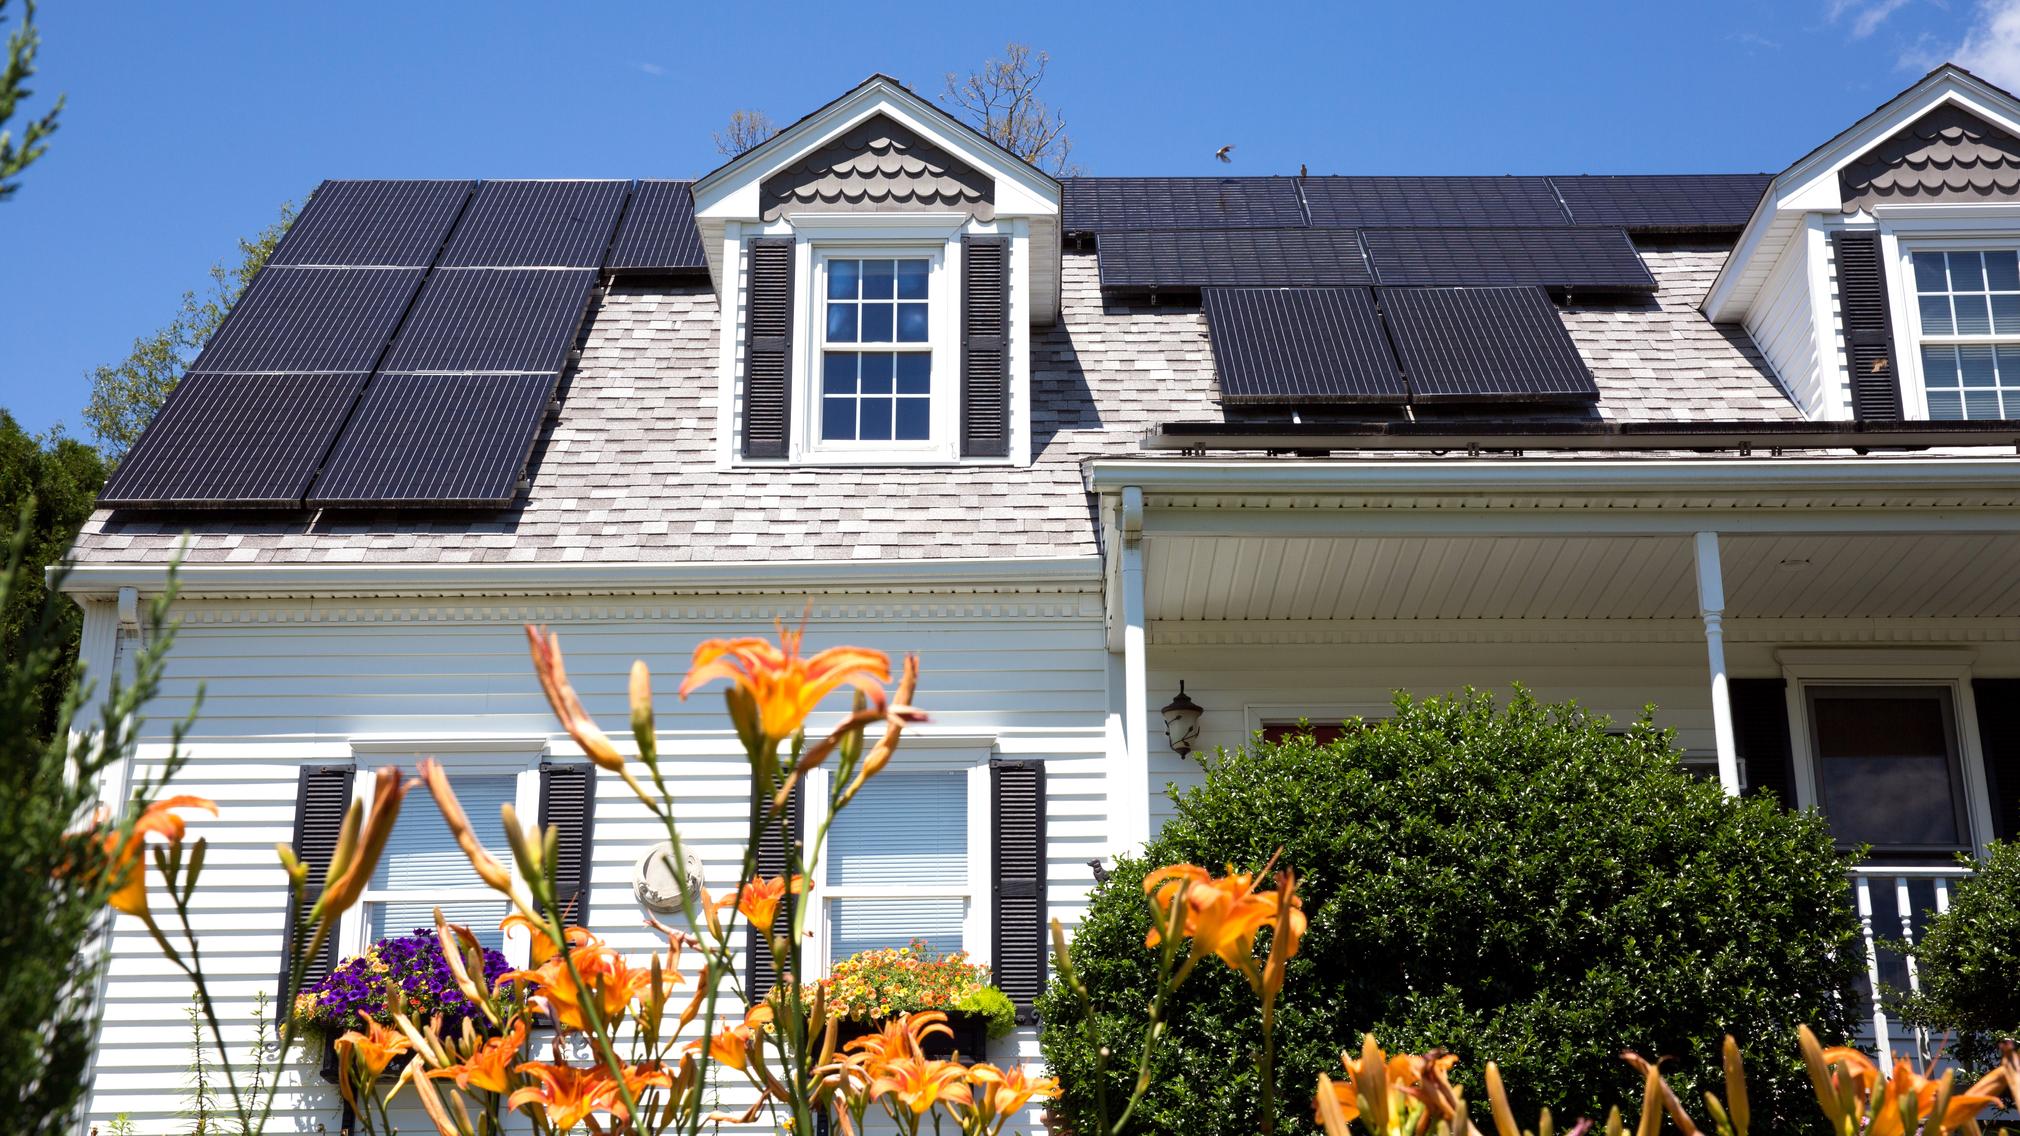 A Homeowner’s Guide to Going Solar